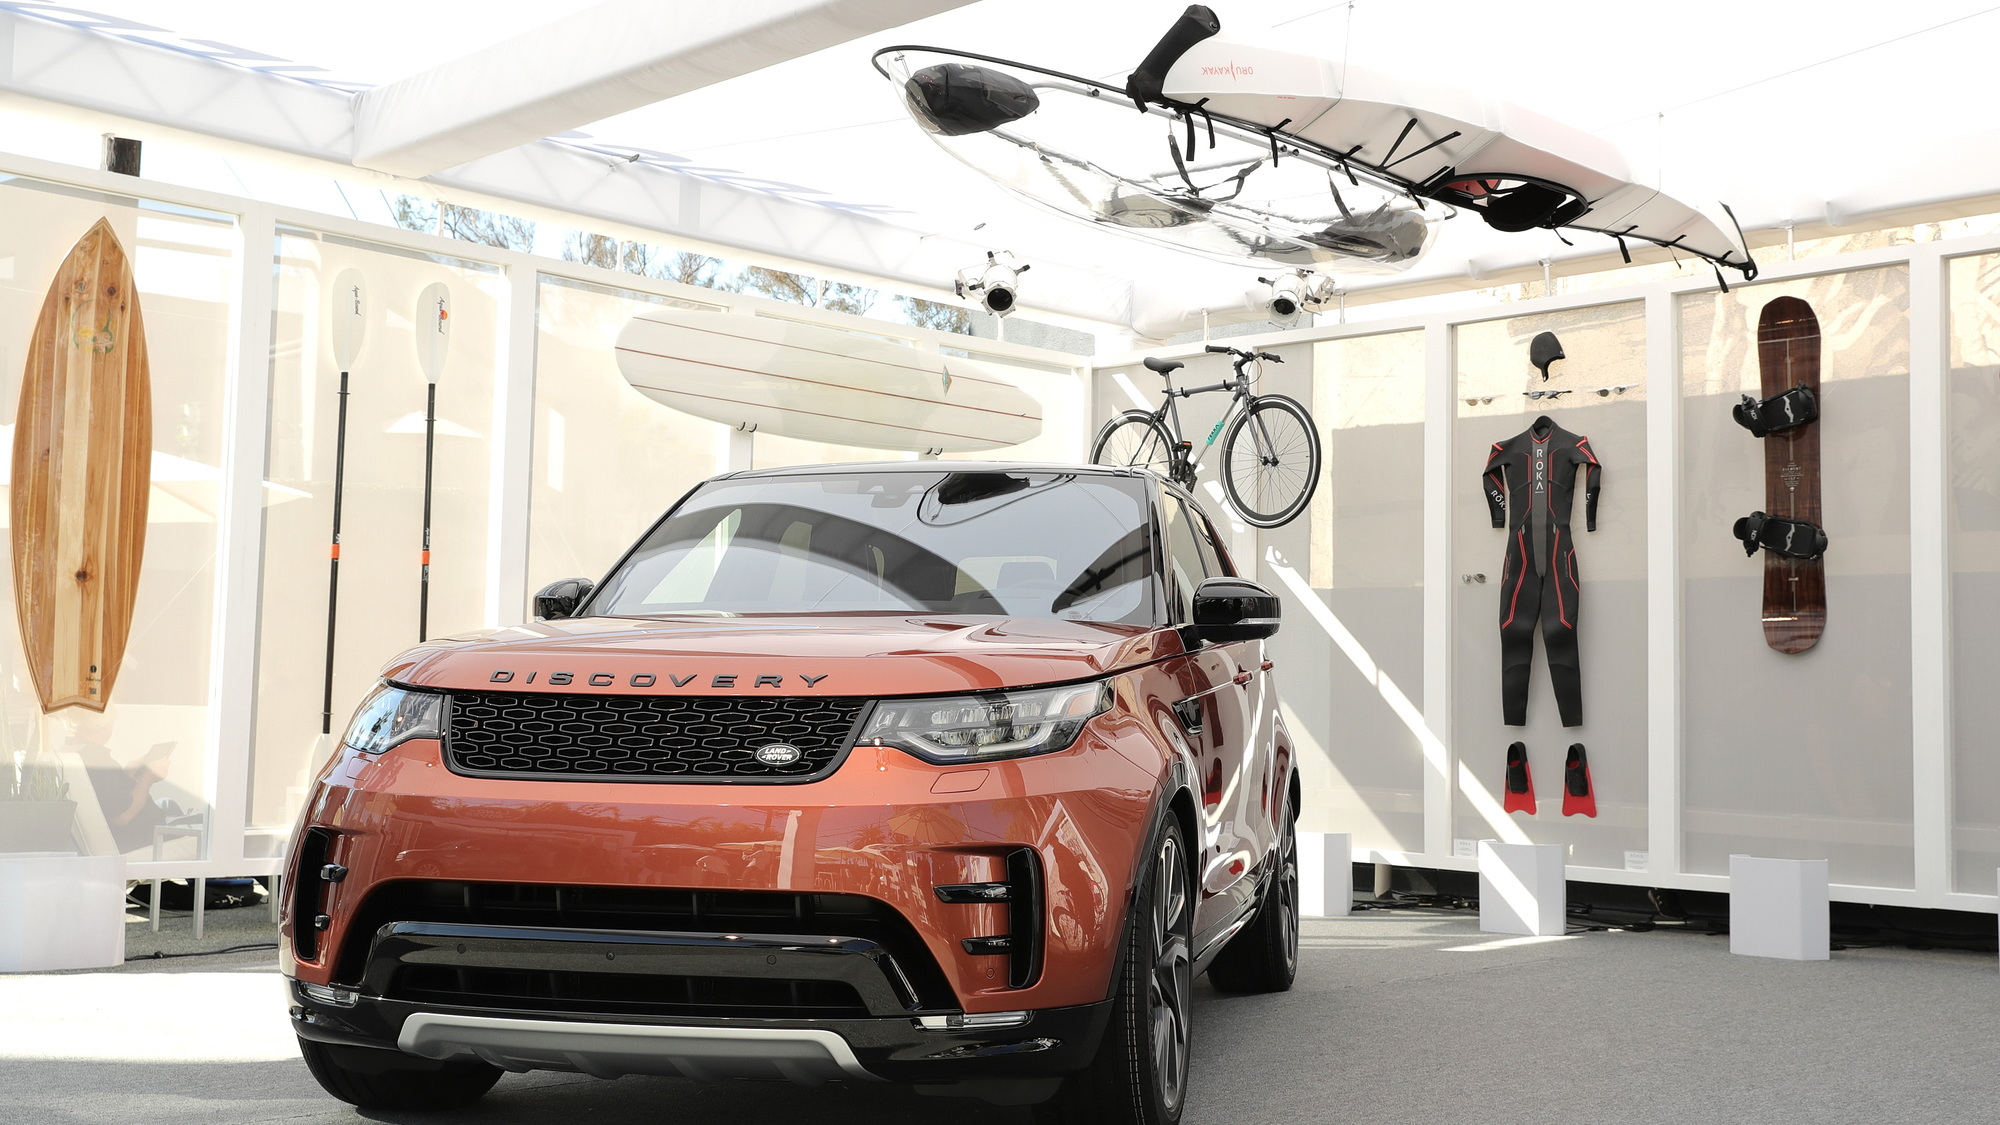 2017 Land Rover Discovery makes US debut in Venice